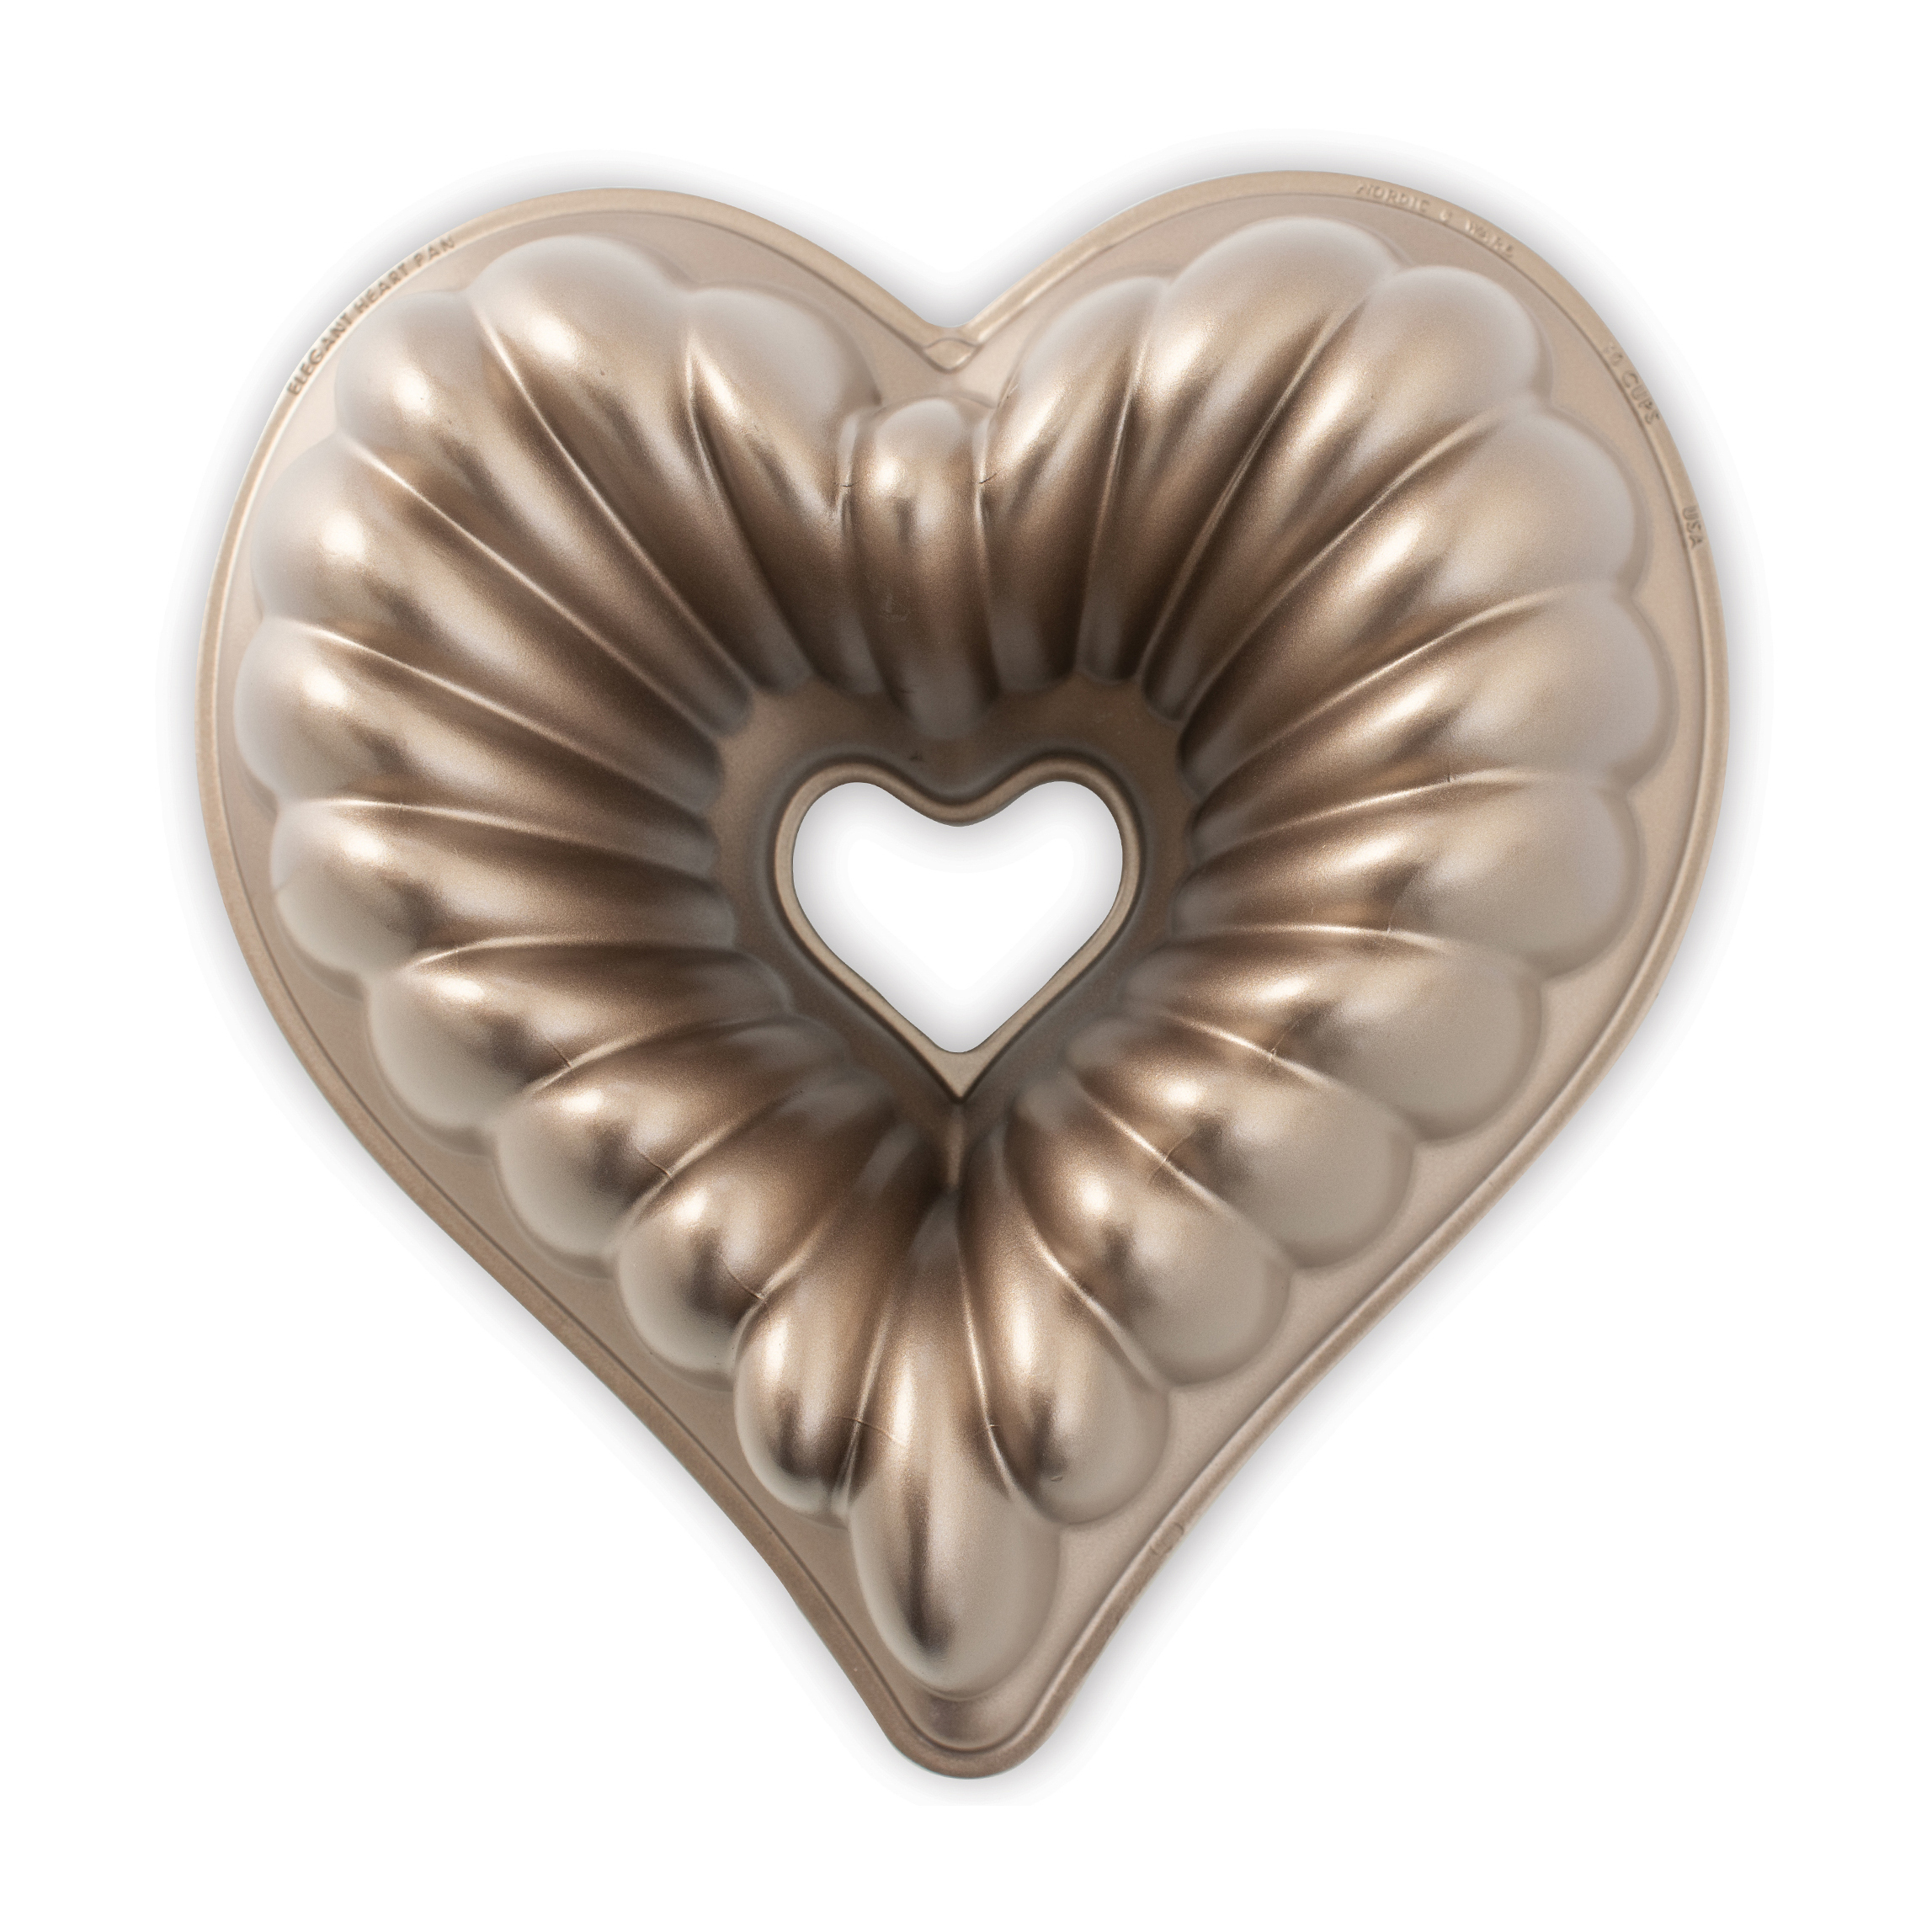 https://www.nordicnest.it/assets/blobs/nordic-ware-stampo-per-ciambellone-a-cuore-nordic-ware-elegant-24-l/515983-01_1_ProductImageMain-d0fe507eac.jpeg